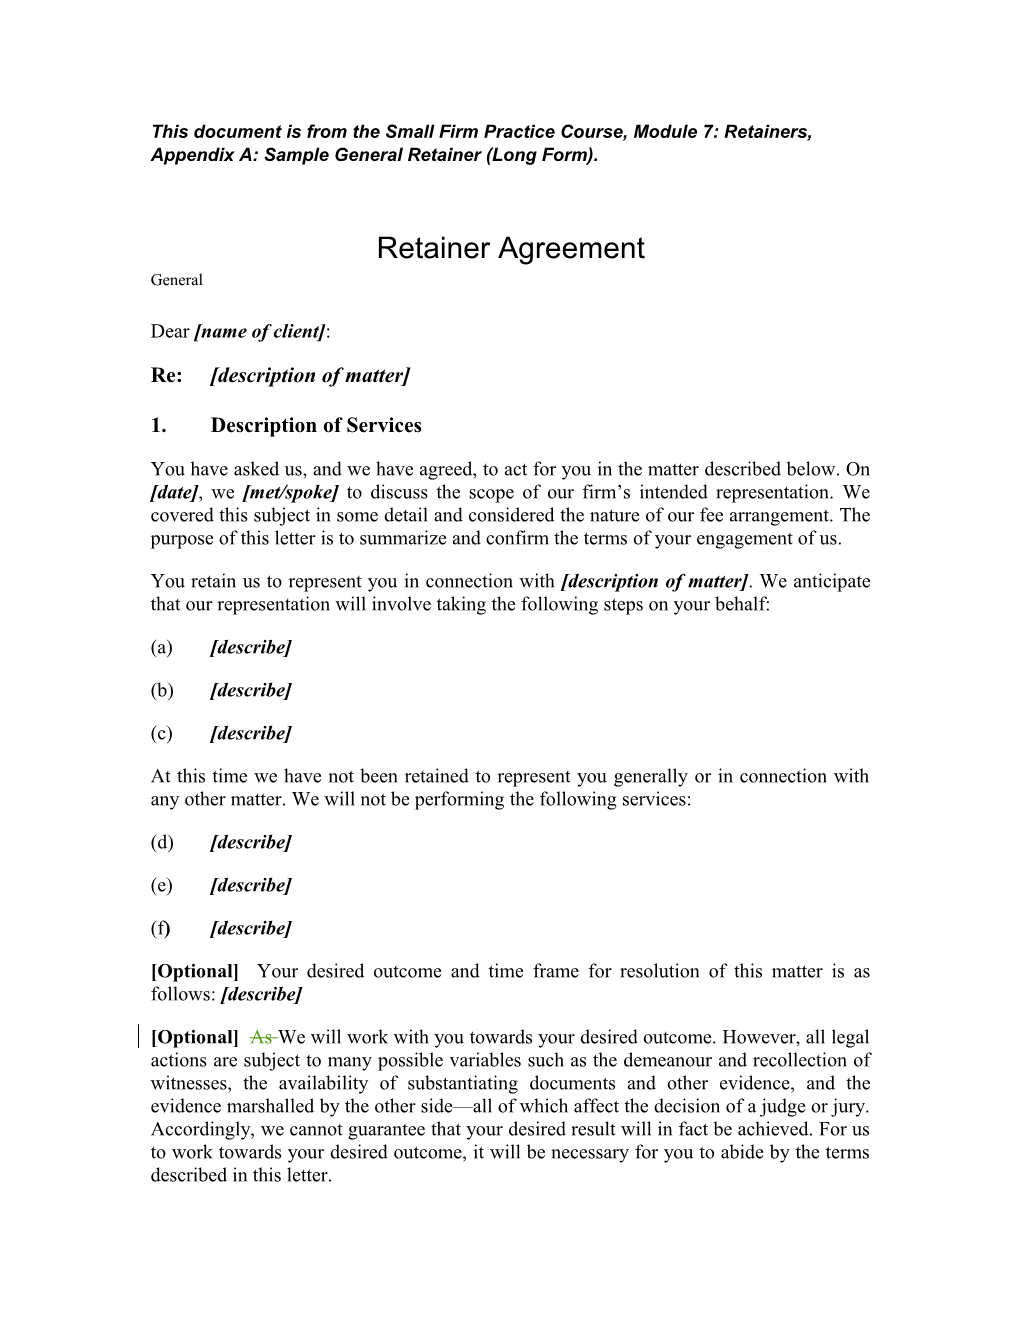 This Document Is from the Small Firm Practice Course, Module 7: Retainers, Appendix A:Sample